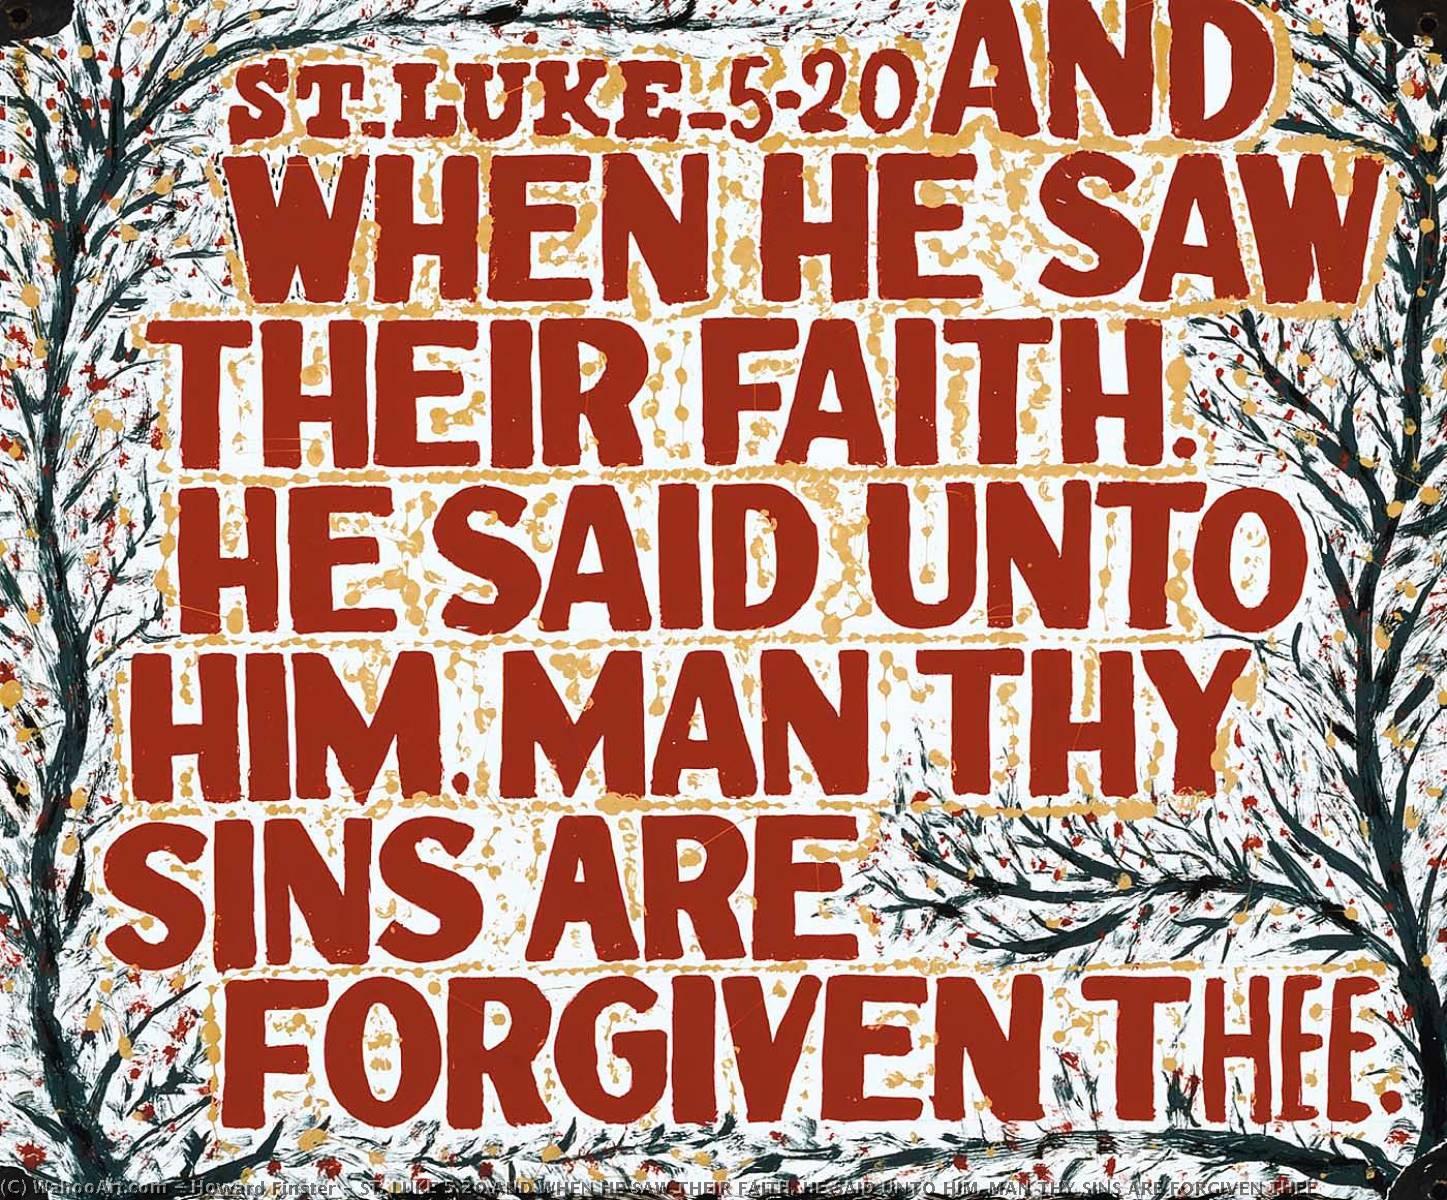 WikiOO.org - Encyclopedia of Fine Arts - Lukisan, Artwork Howard Finster - ST. LUKE 5 20 AND WHEN HE SAW THEIR FAITH. HE SAID UNTO HIM. MAN THY SINS ARE FORGIVEN THEE